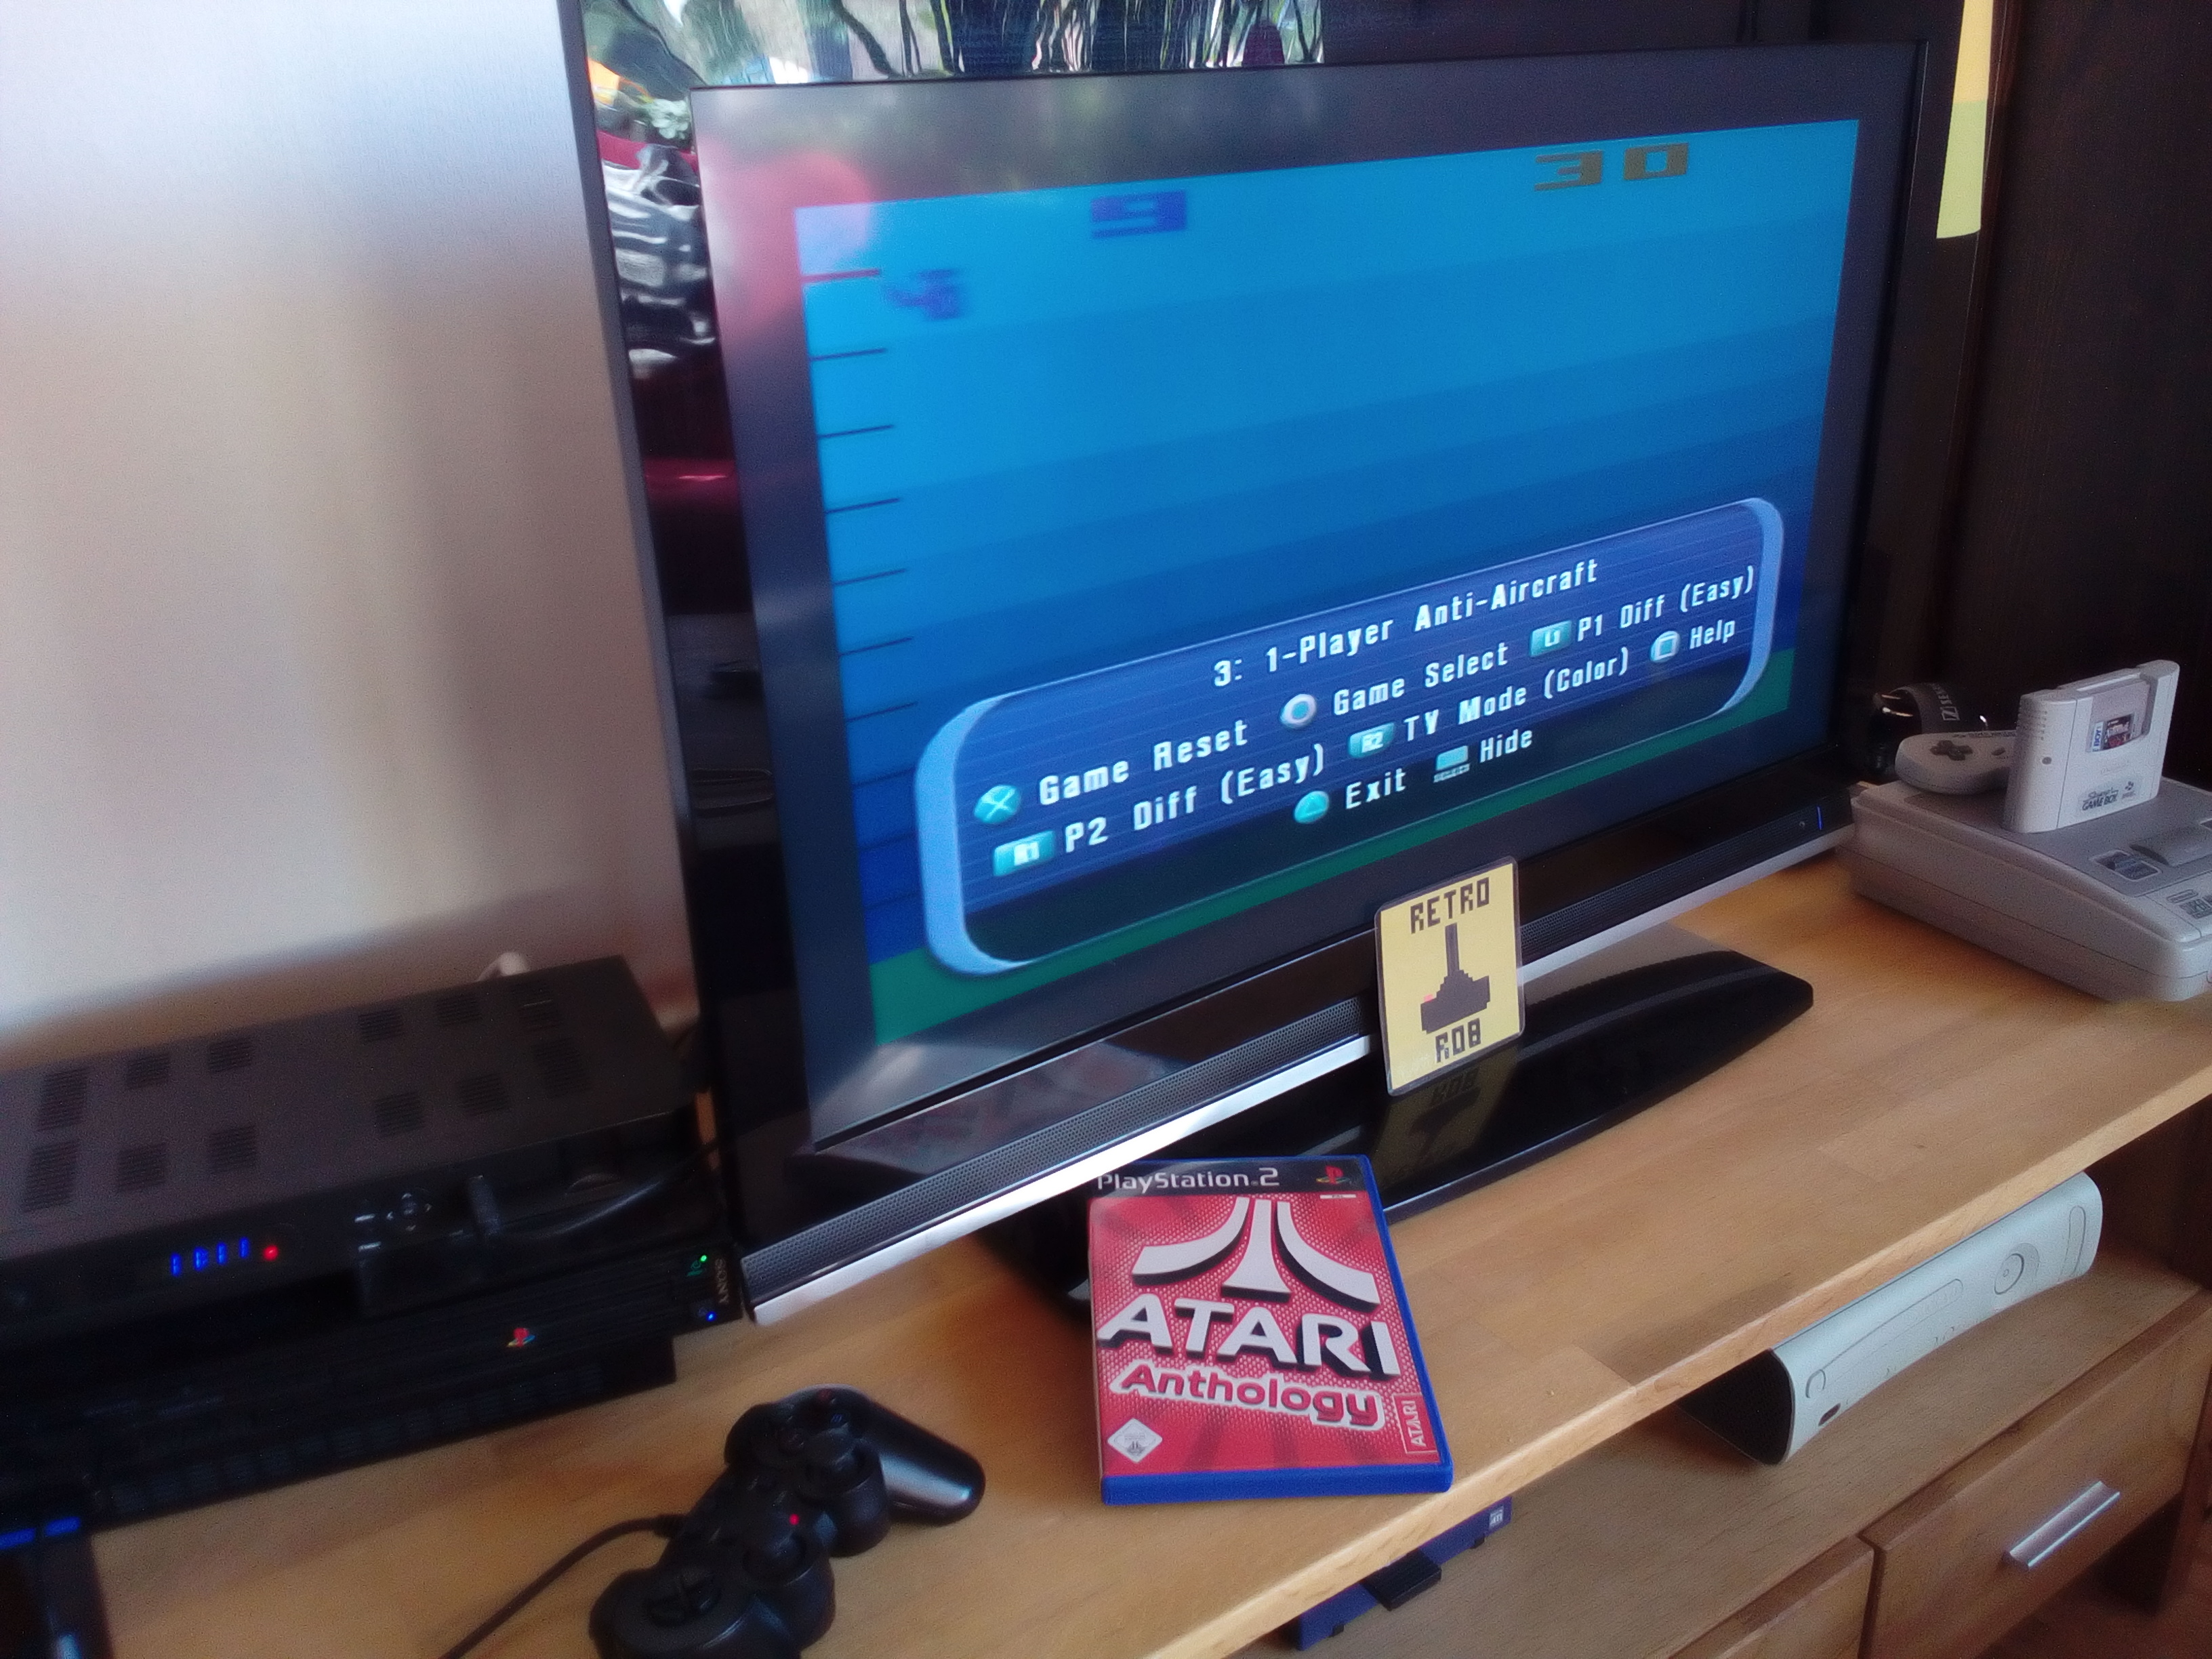 RetroRob: Atari Anthology: Air-Sea Battle [Game 3B: Point Difference] (Playstation 2) 21 points on 2019-02-23 03:15:27